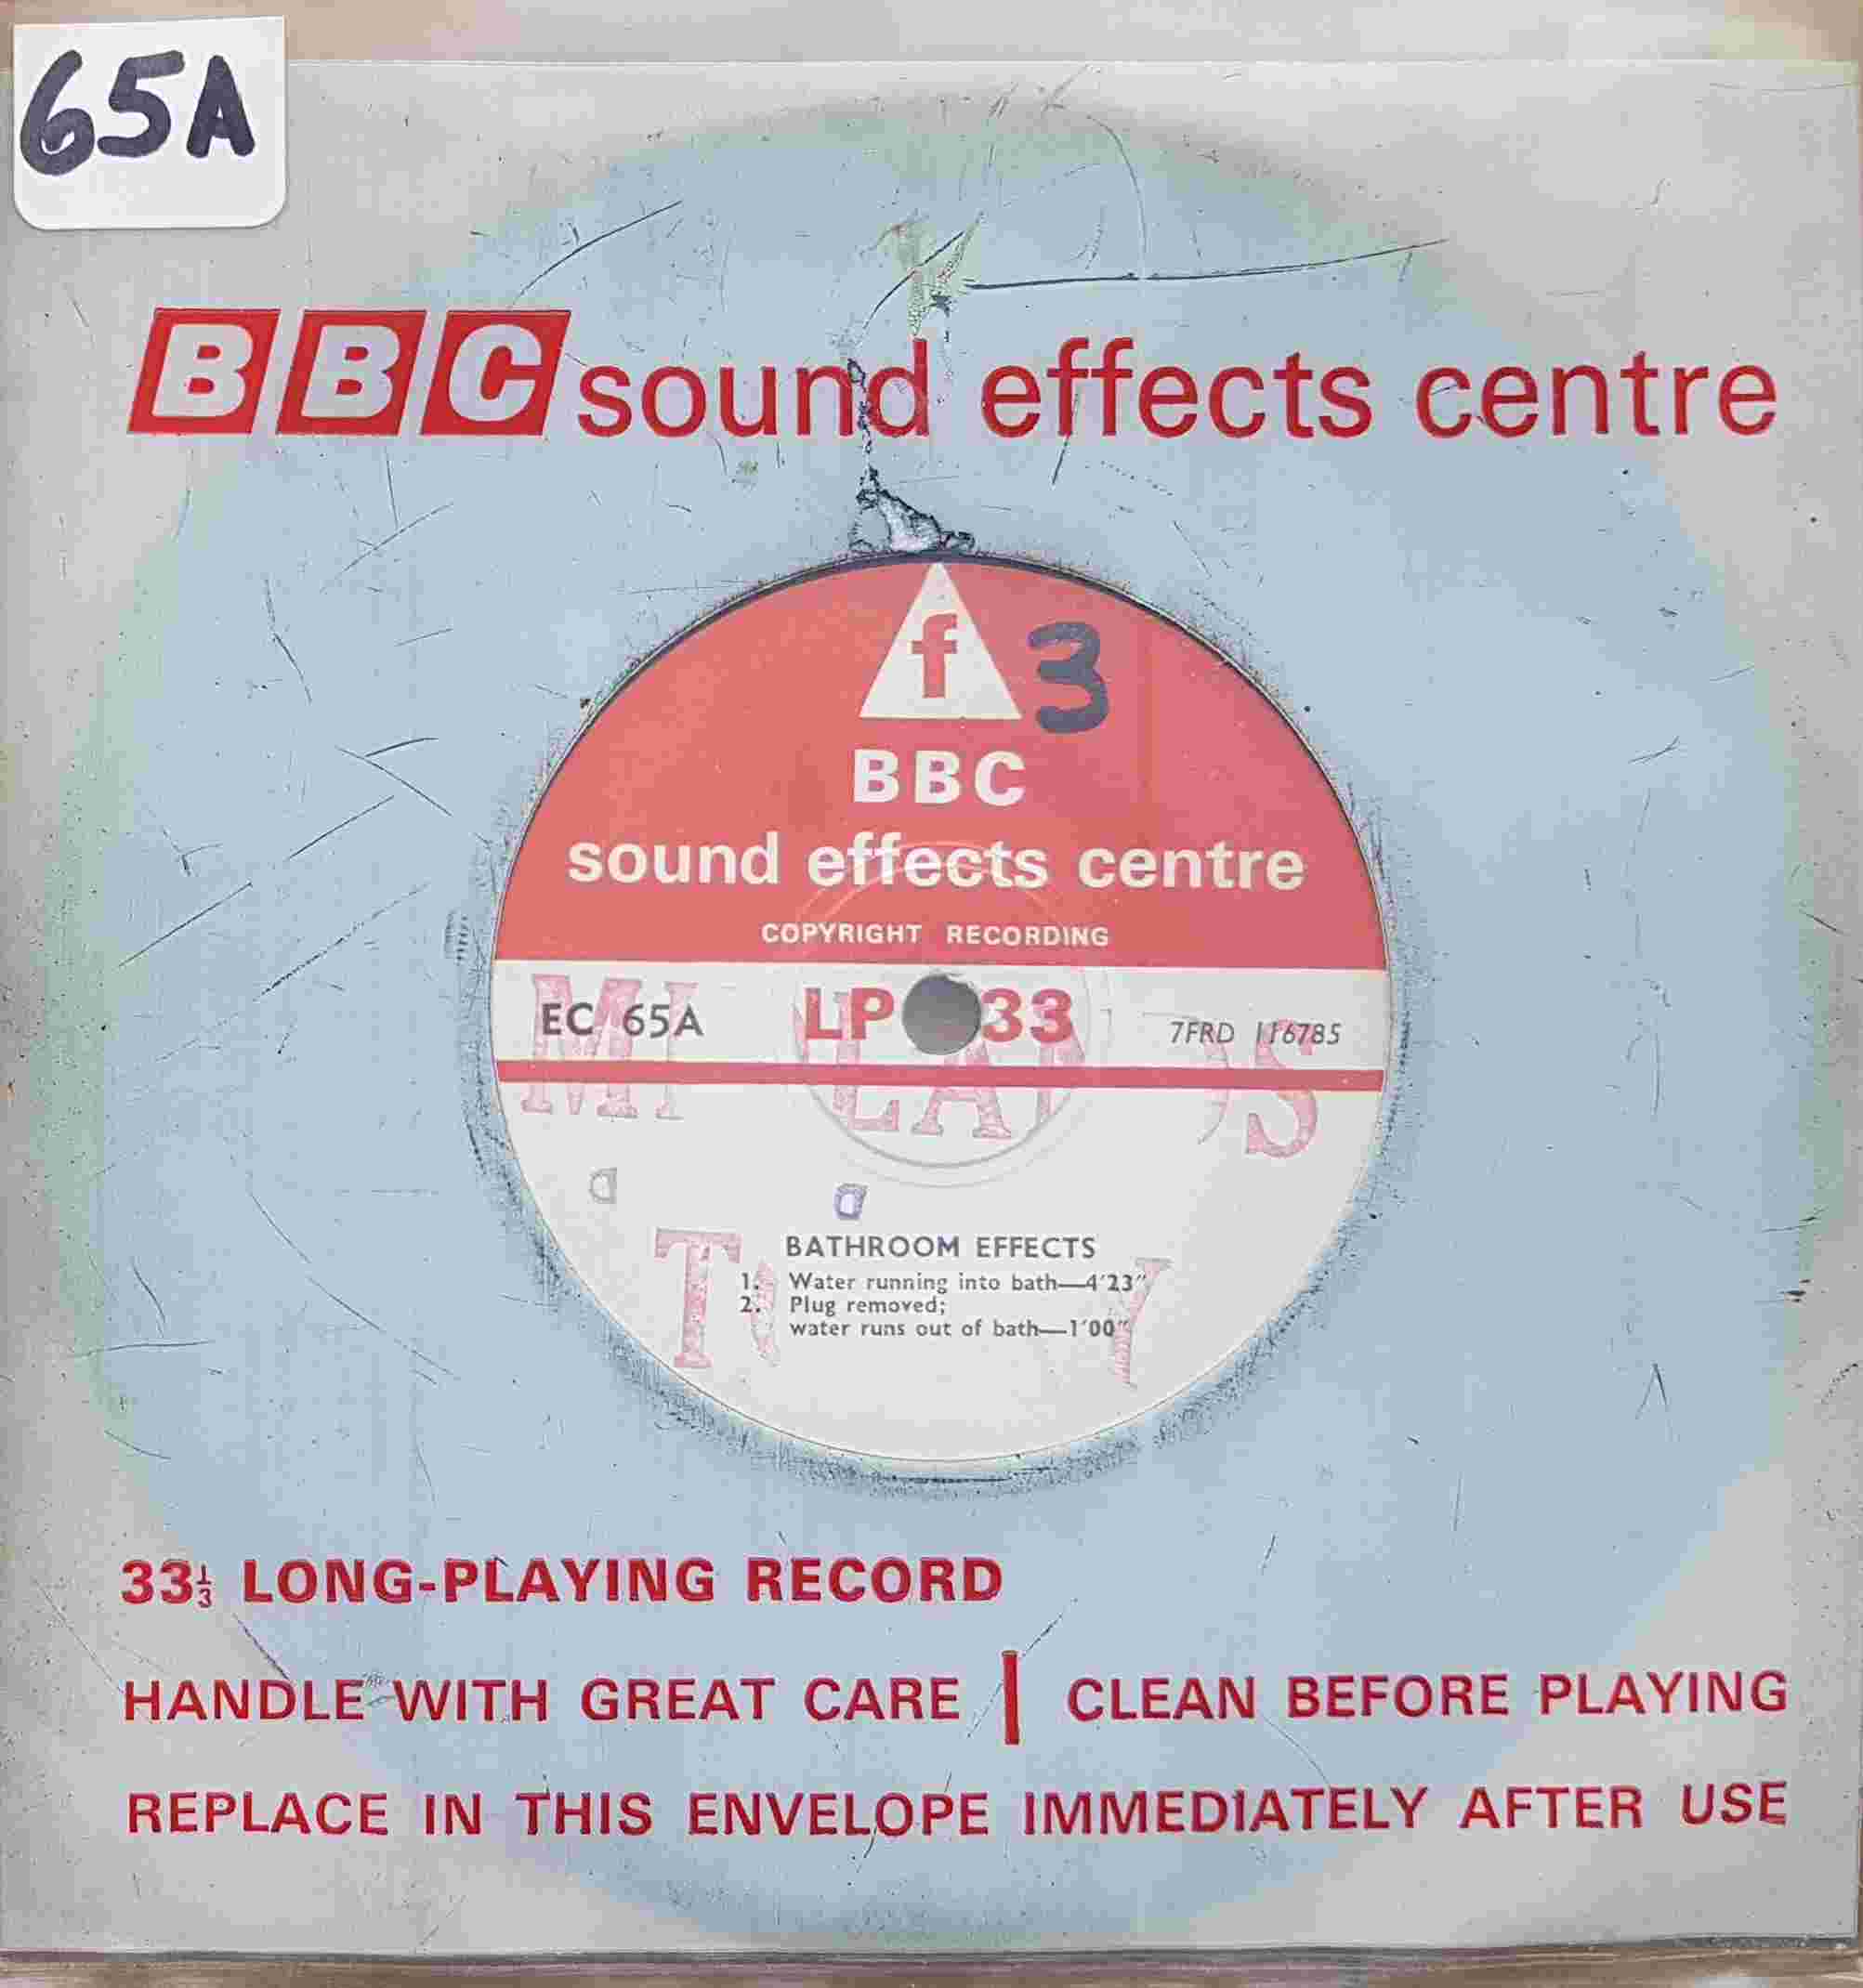 Picture of EC 65A Bathroom effects by artist Not registered from the BBC records and Tapes library